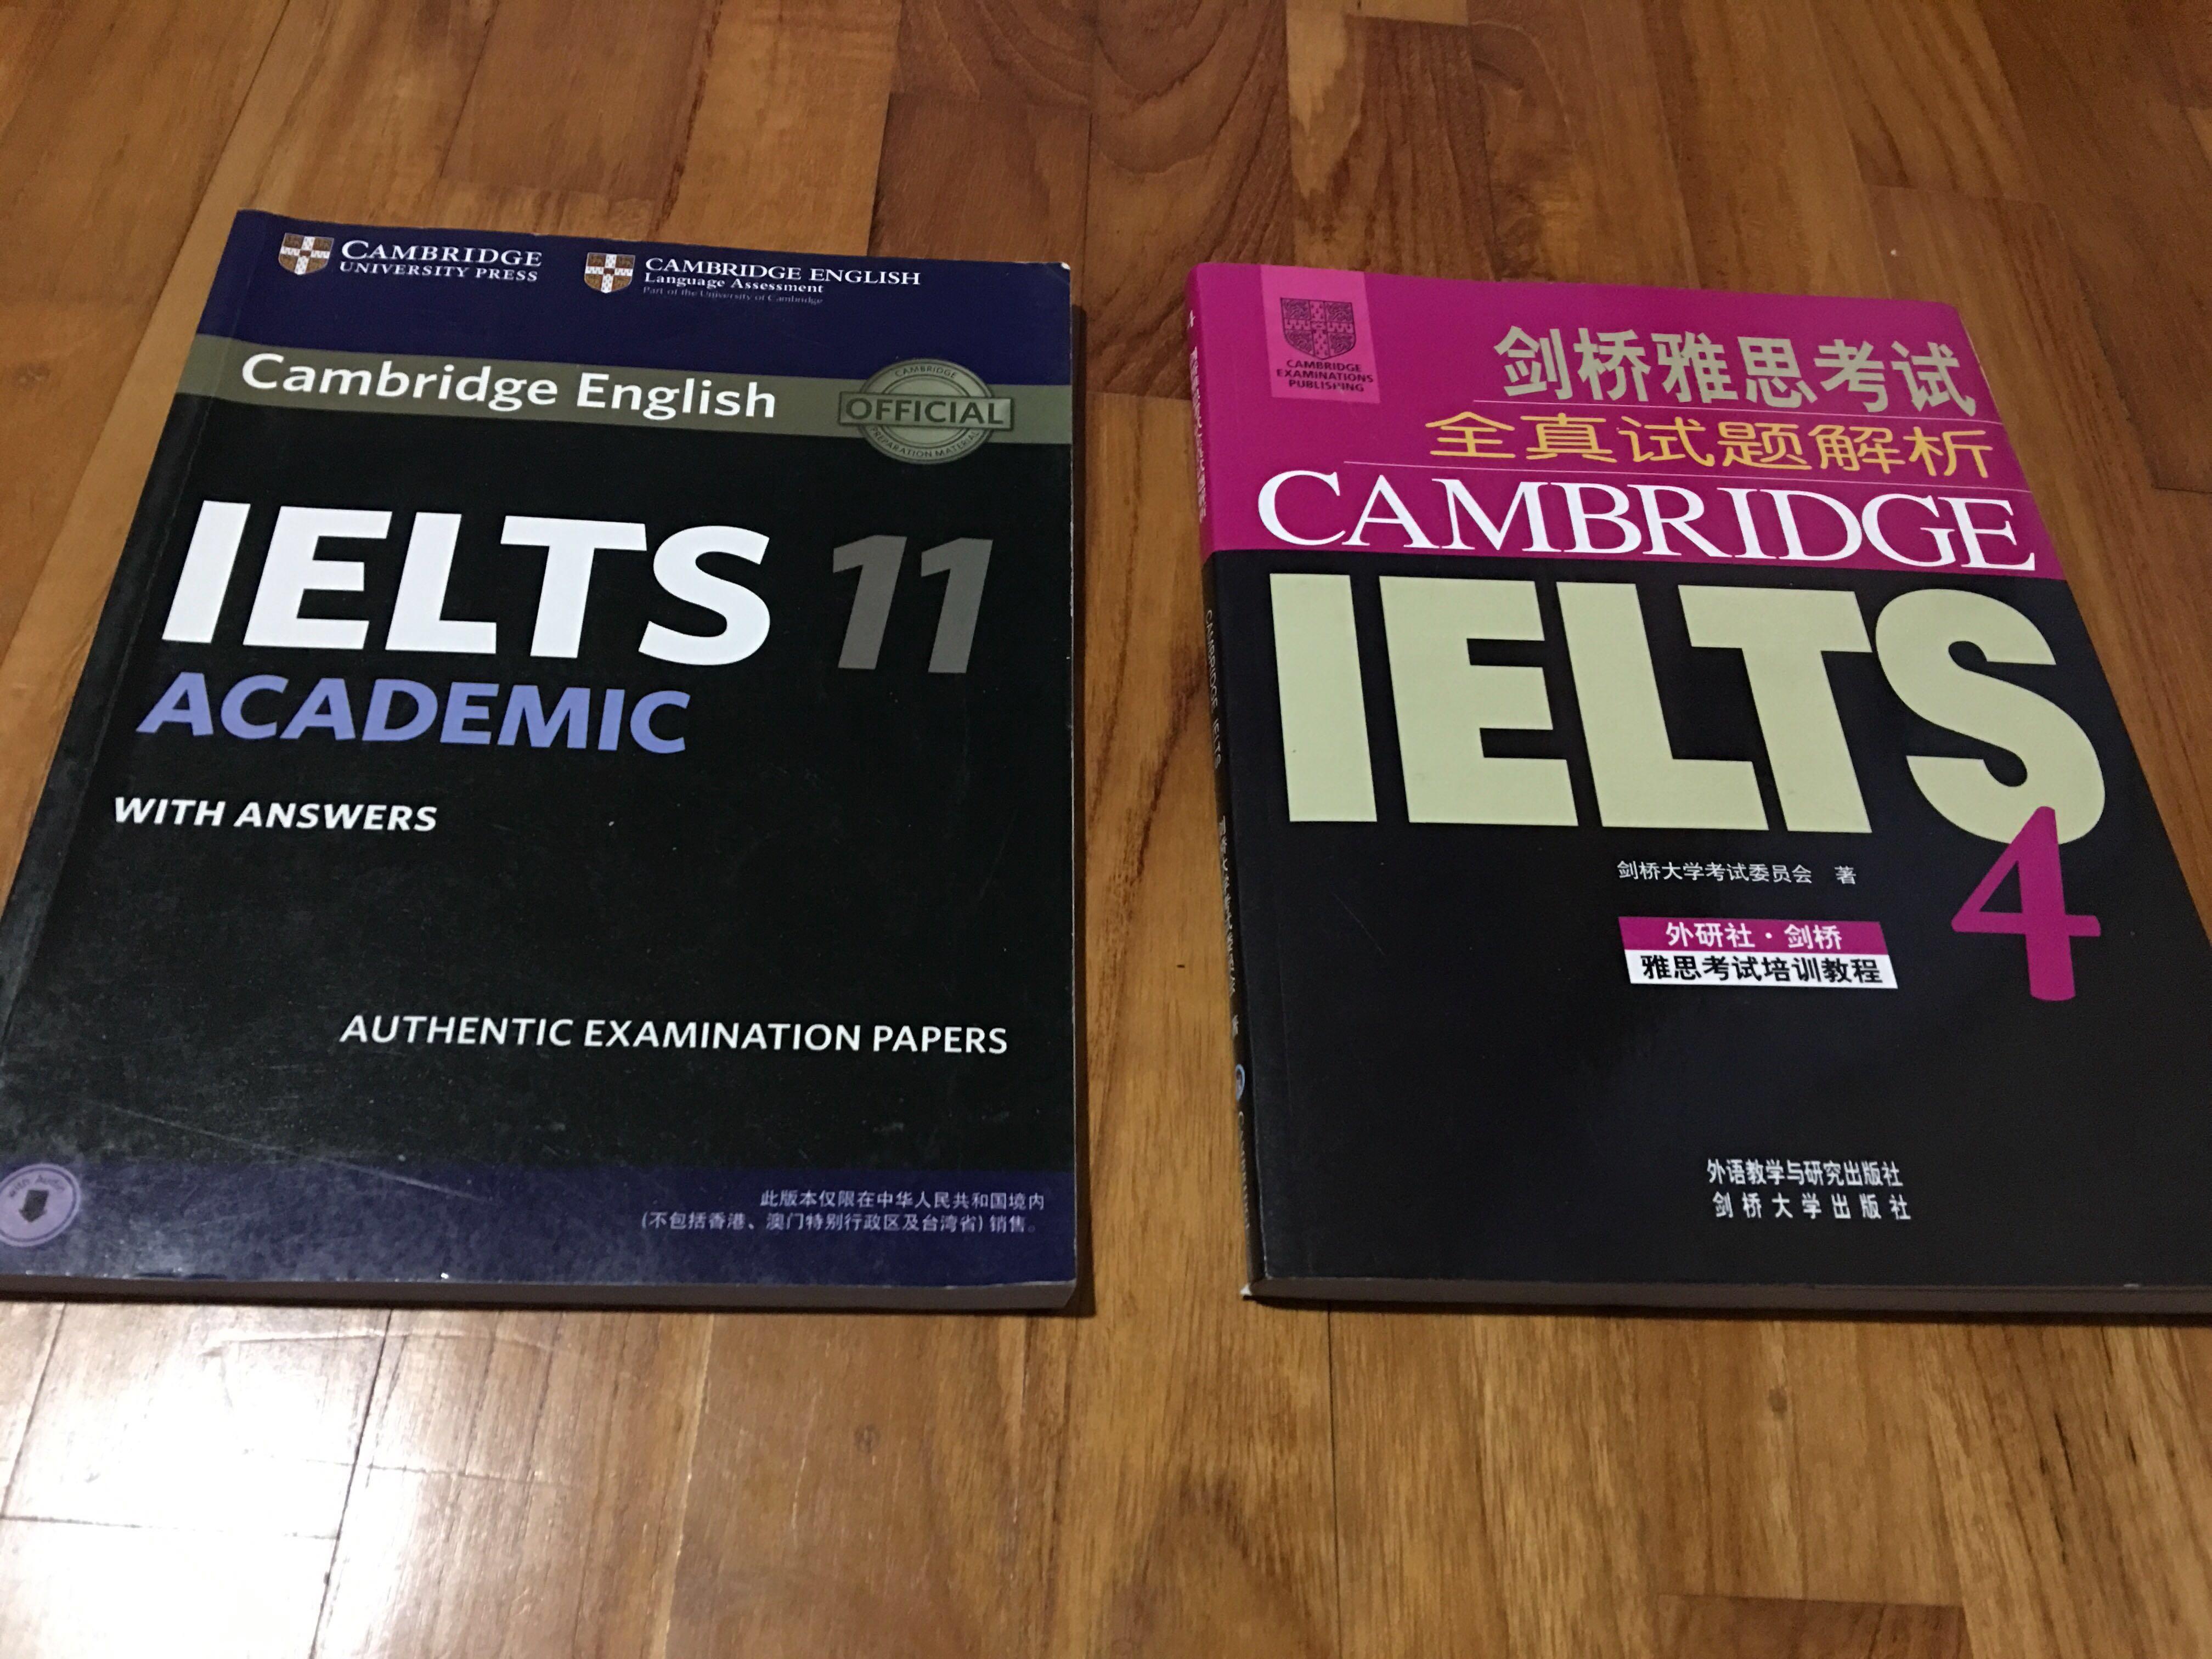 IELTS Academic 11 with free book 4 (British council), Books